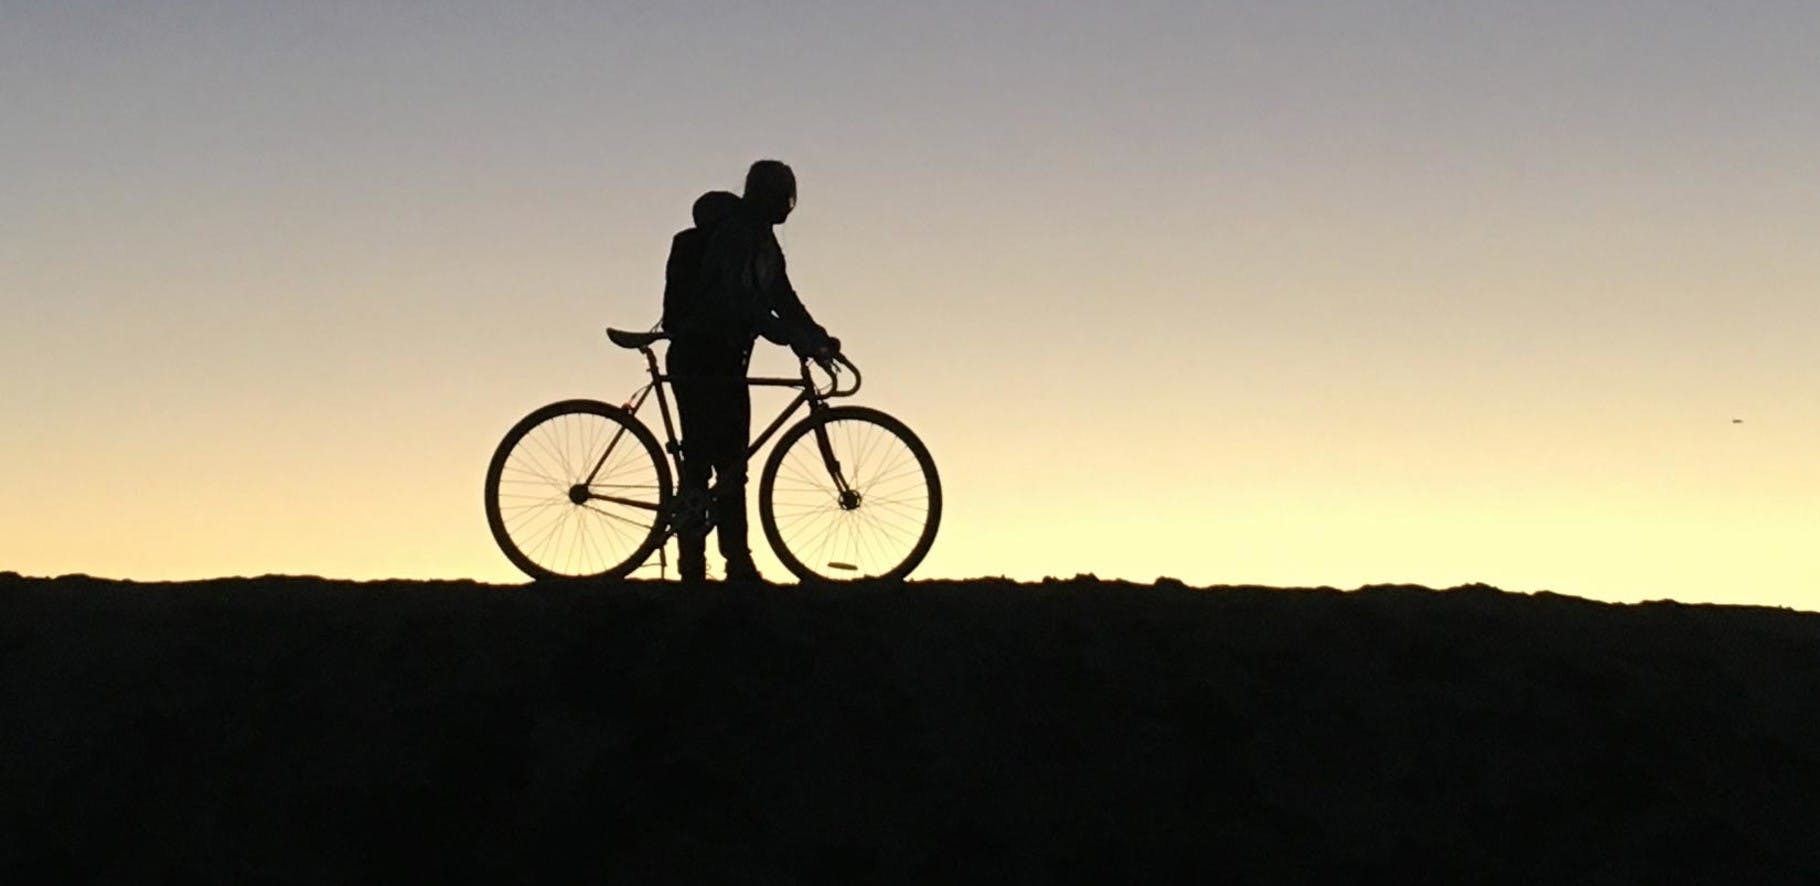 Black silhouette of a man and his bicycle against an evening sunset backdrop